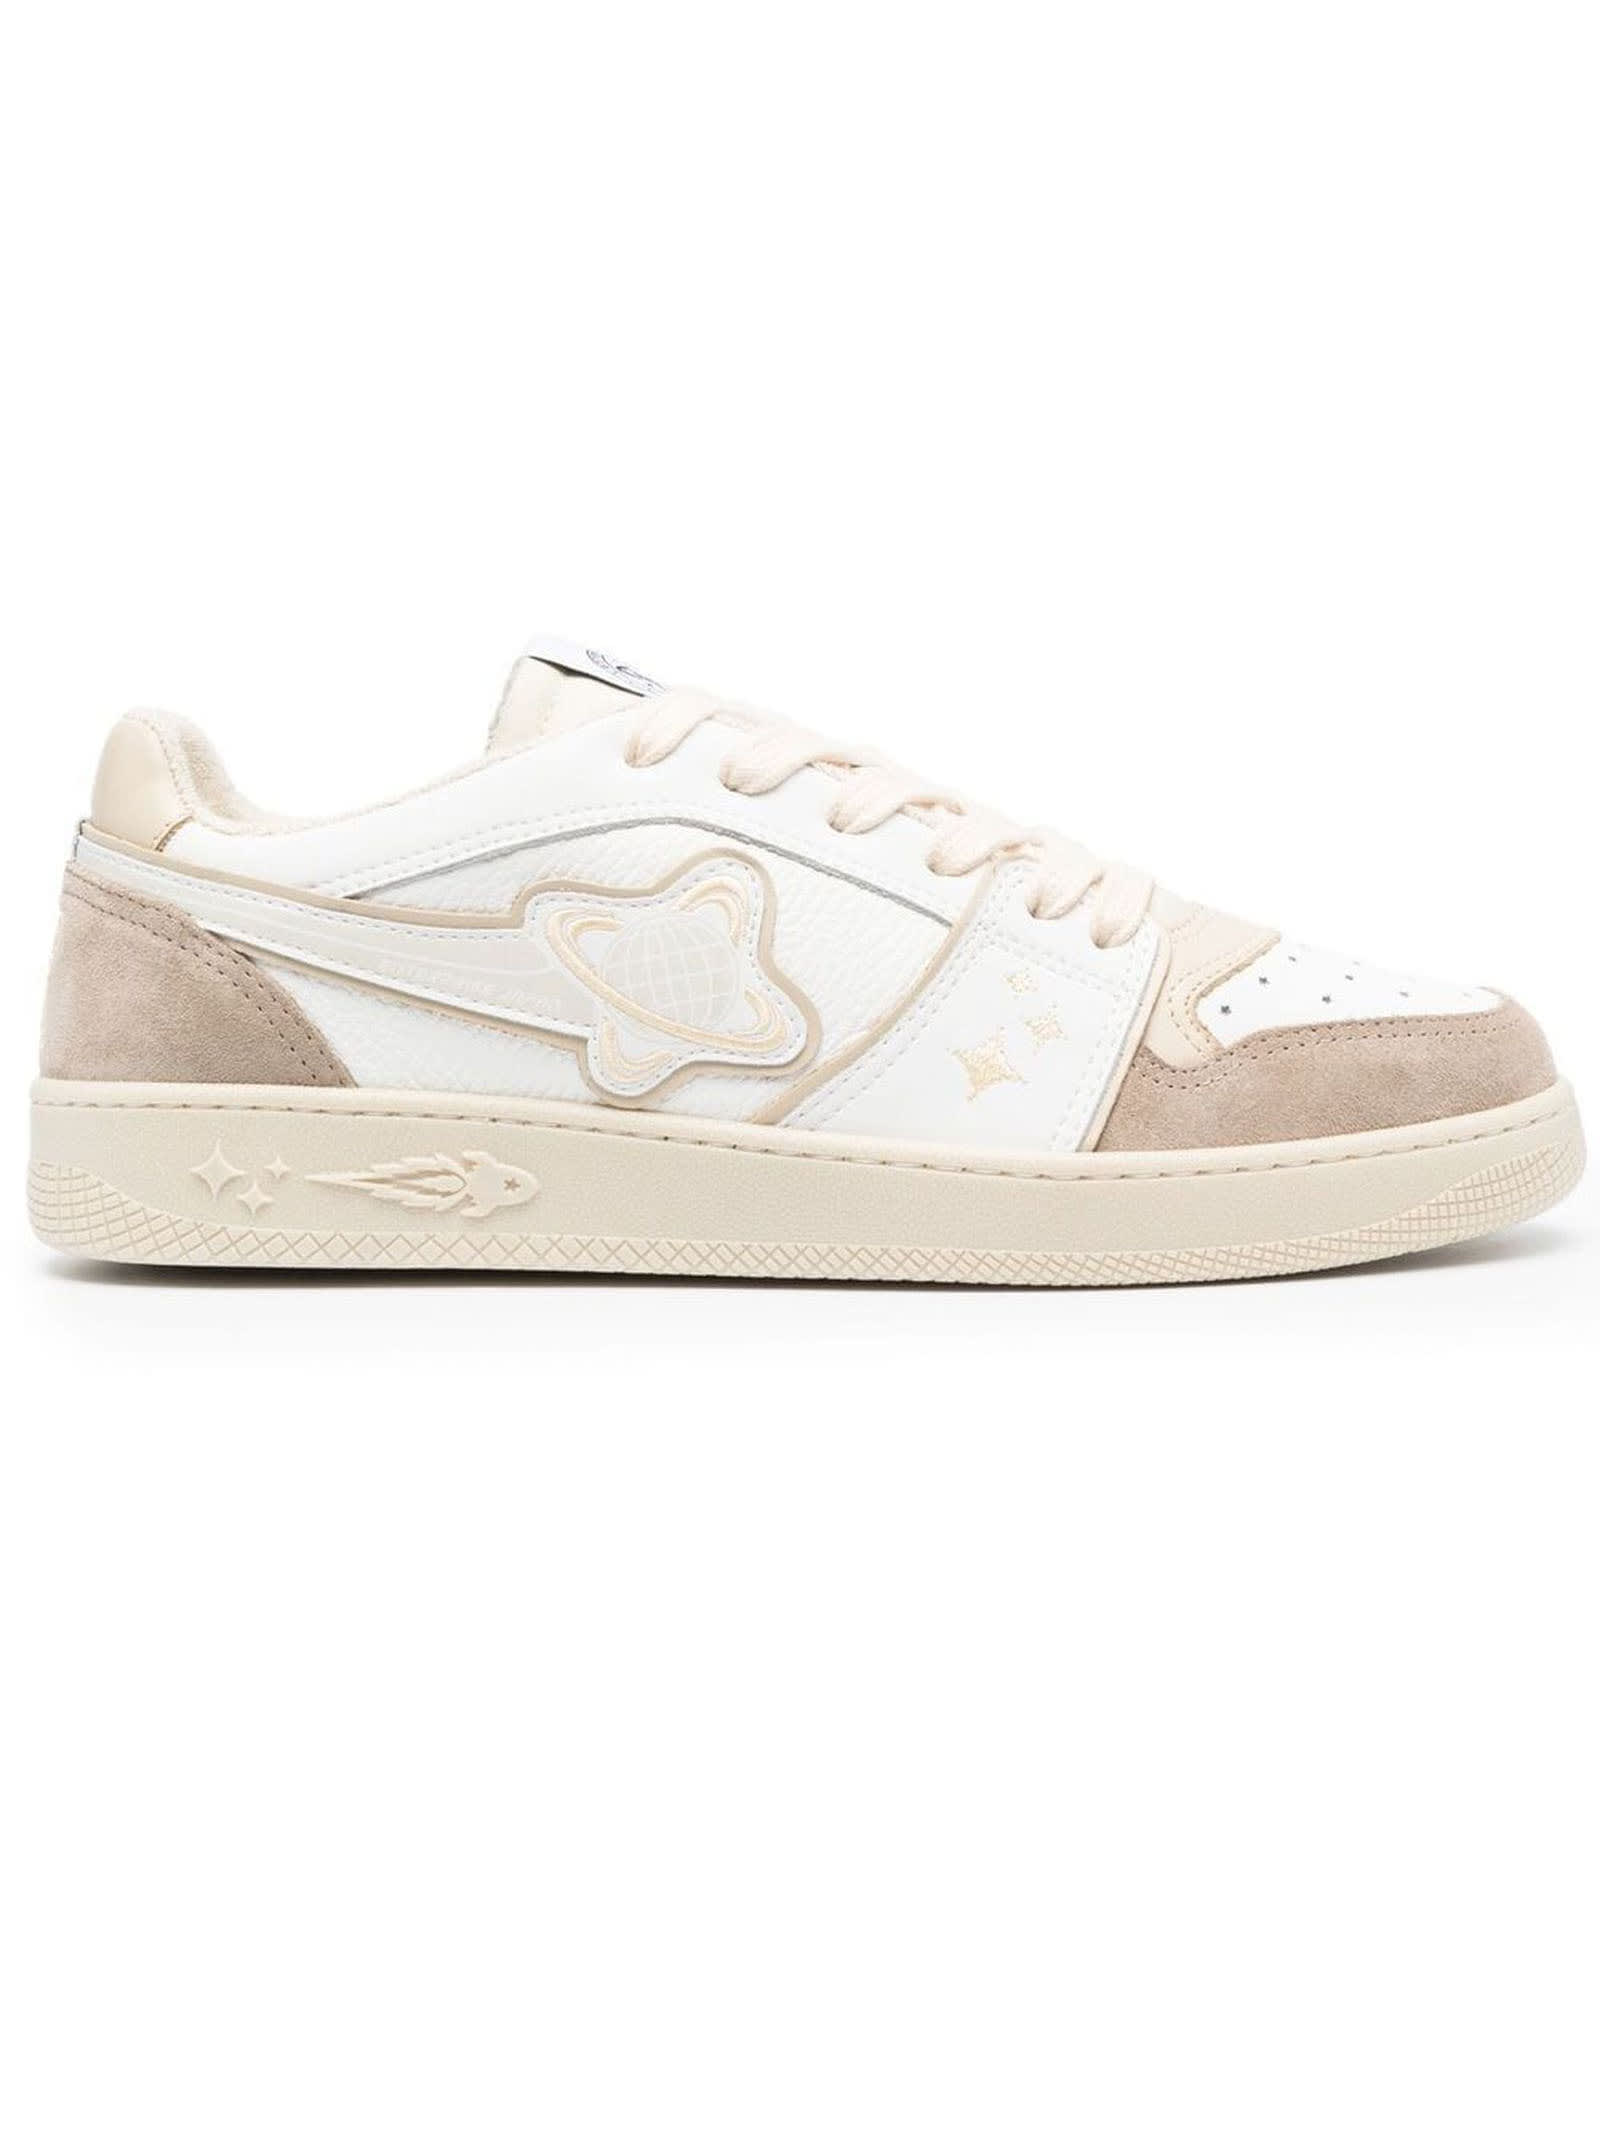 Enterprise Japan White And Beige Leather Sneakers